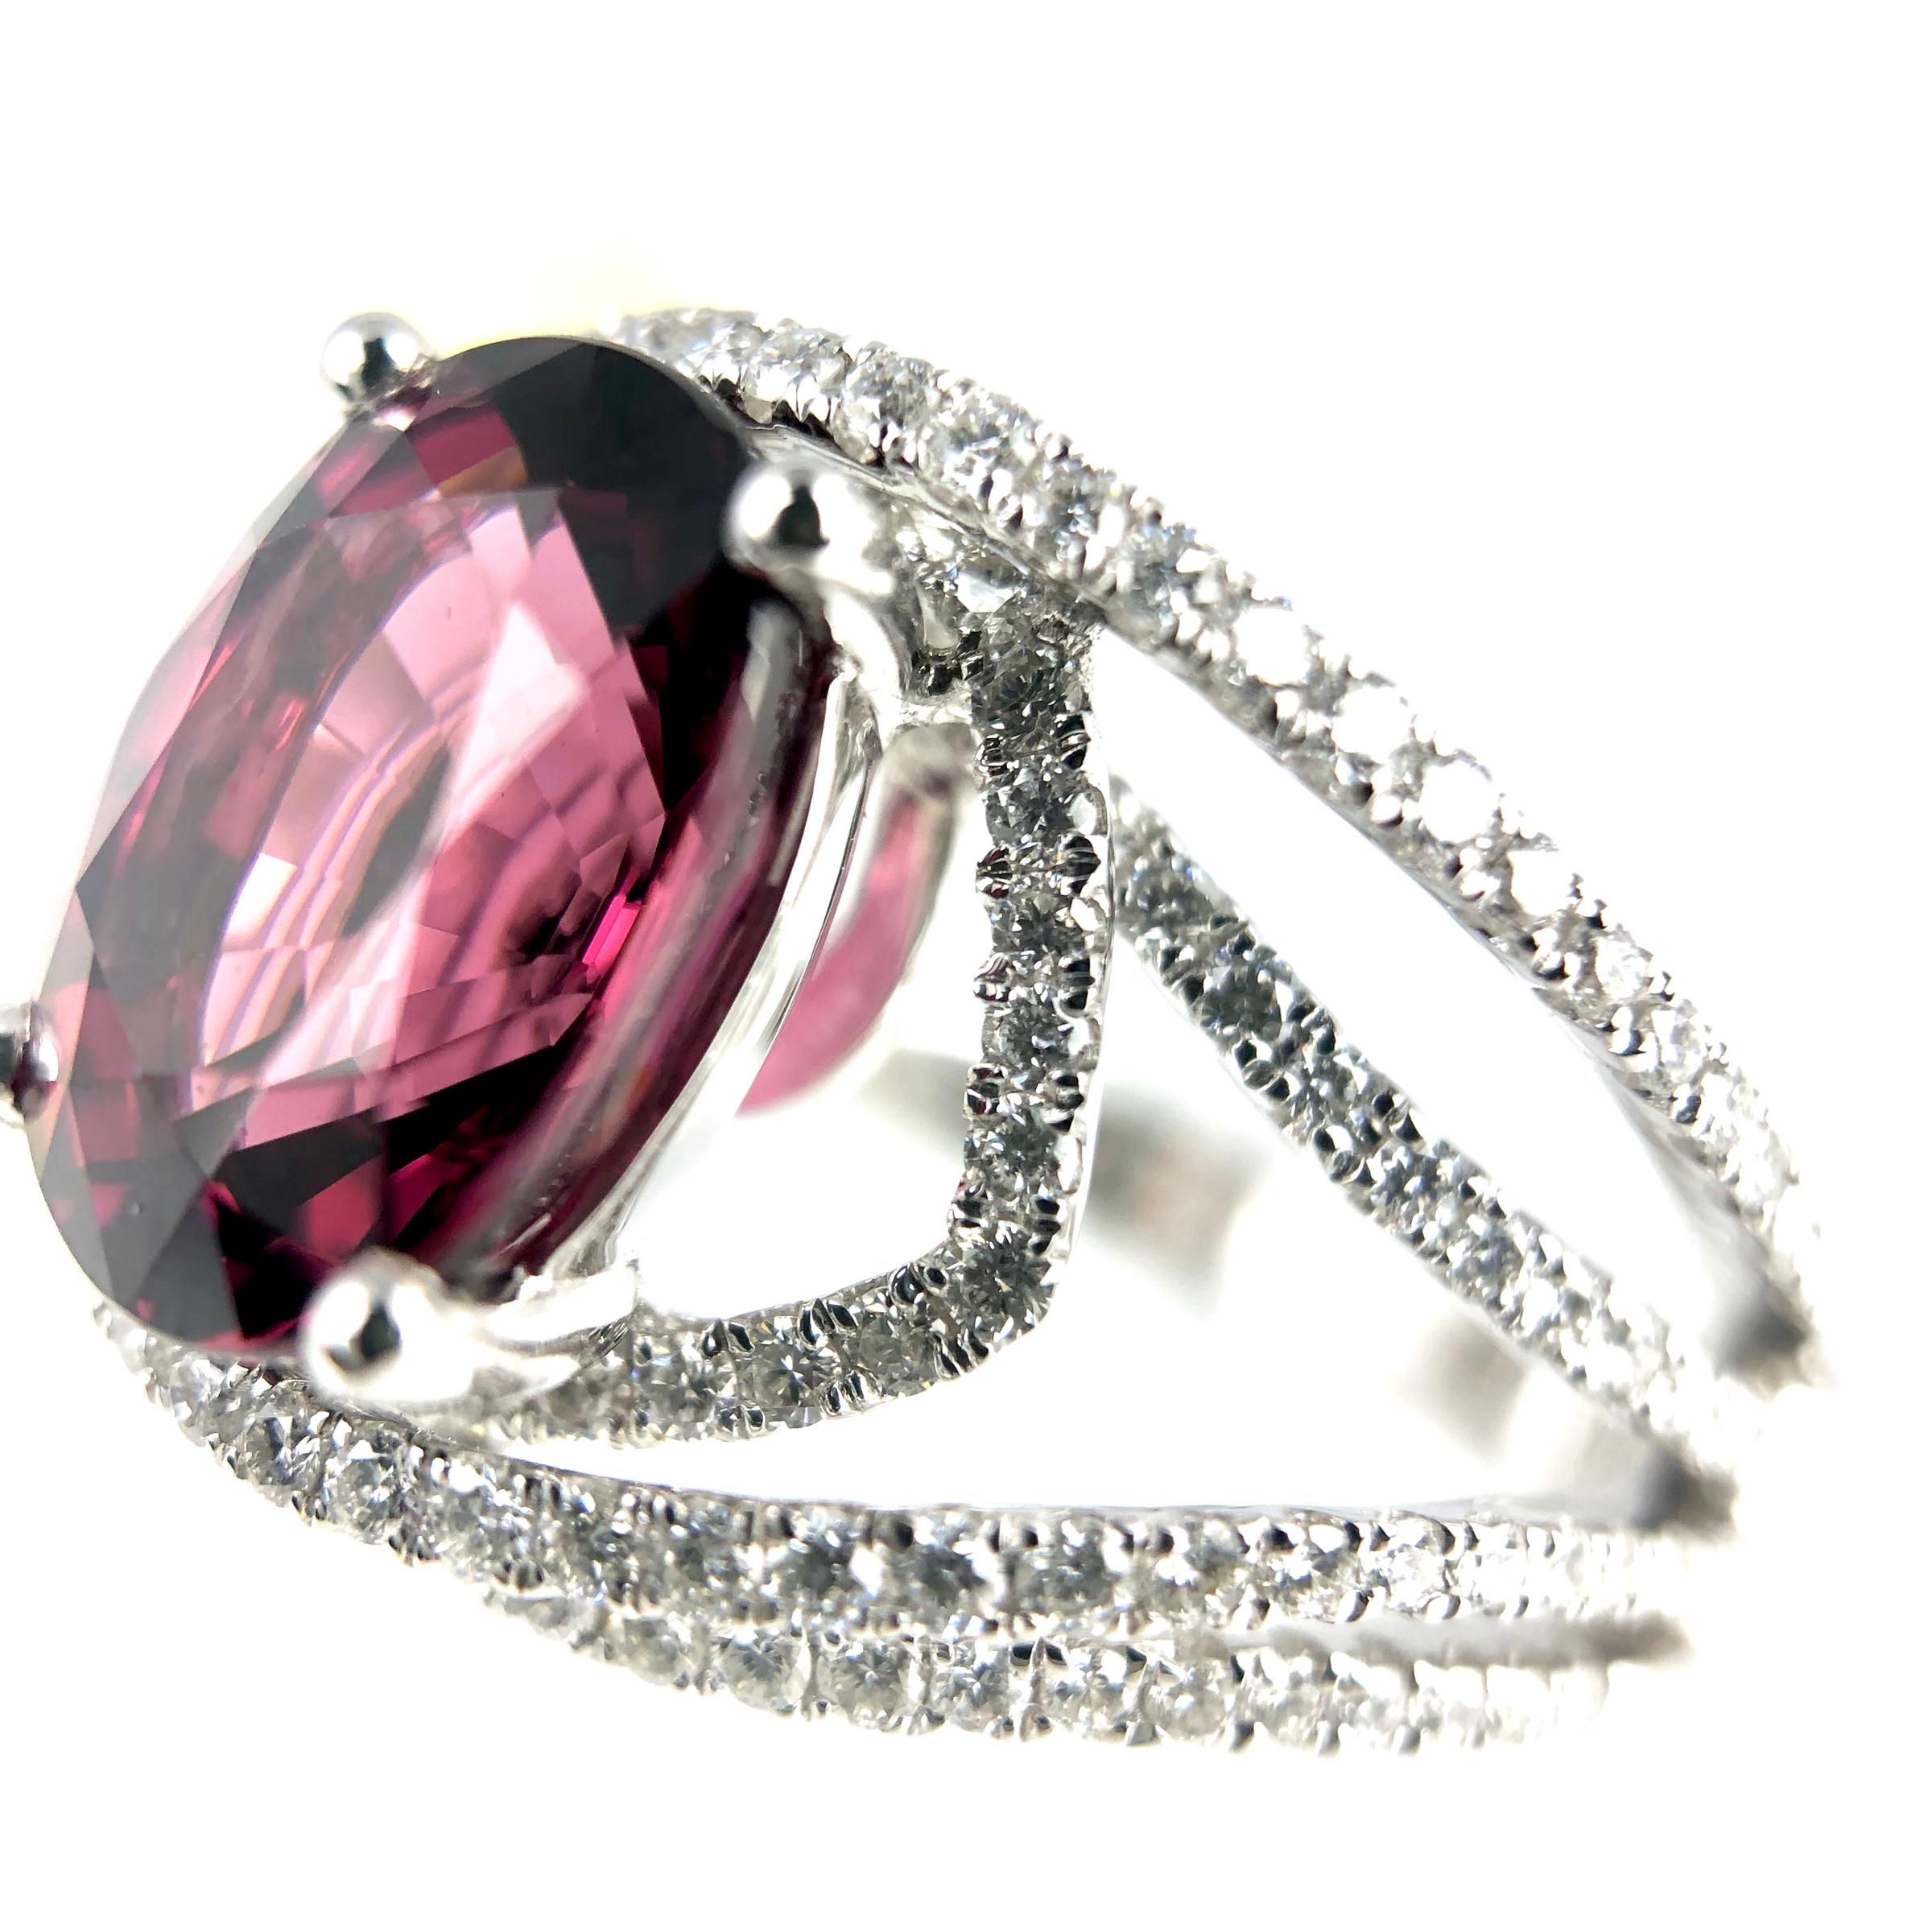 (DiamondTown) This gorgeous fashion ring has a 4.14 carat Oval Cut Raspberry Garnet center, atop intersecting layers of white diamonds. Total diamond weight 0.75 carats.

Ring size 6.5 with room to size up or down.
Set in 18k White Gold.

Many of